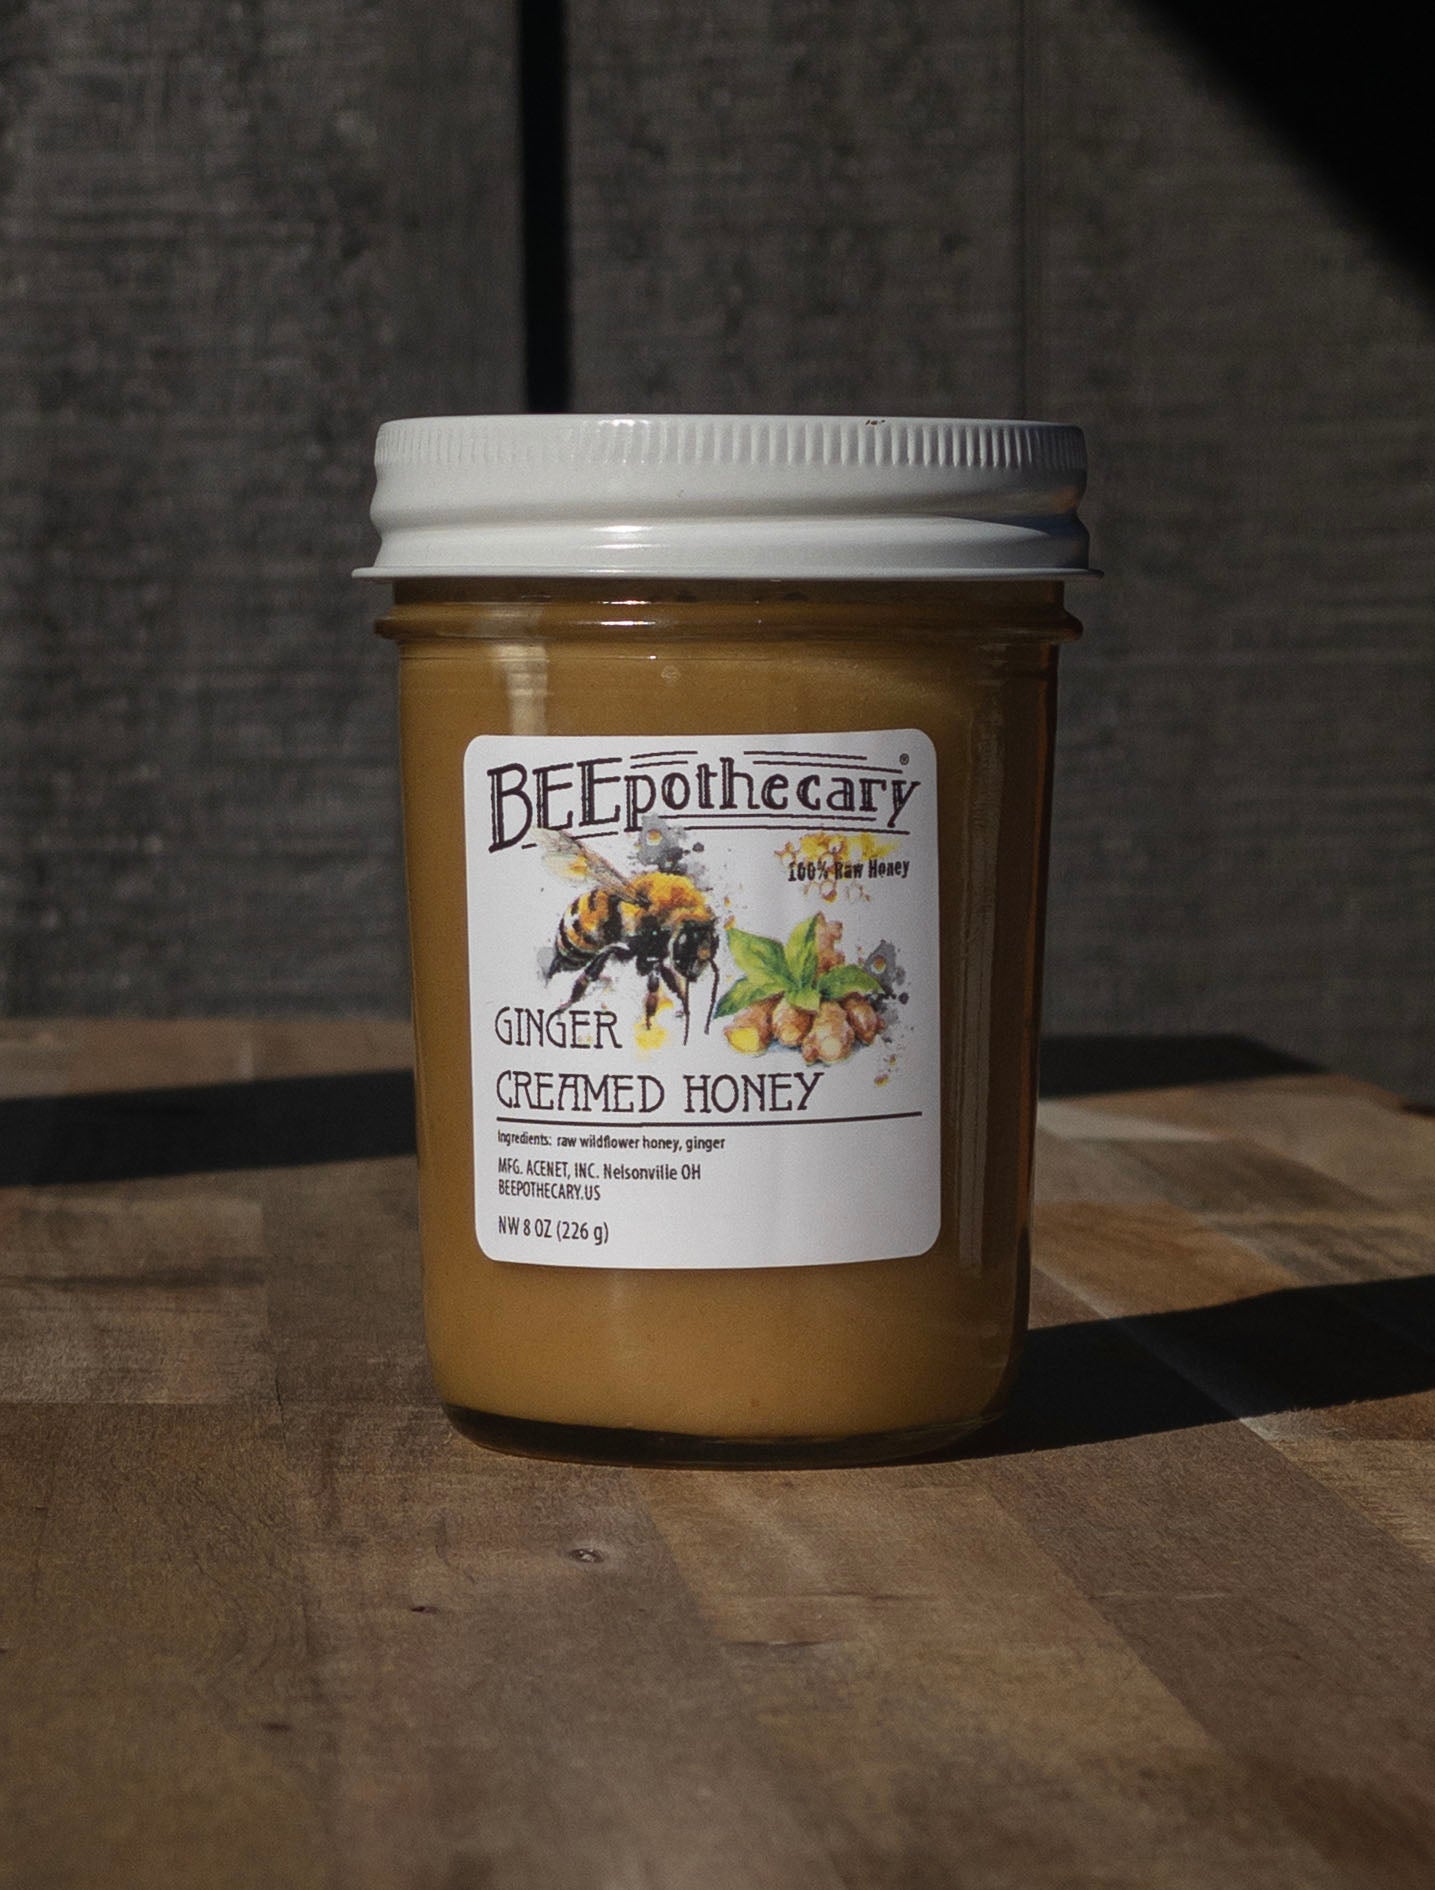 Ginger Creamed Honey in an 8oz jar with a twist off lid.